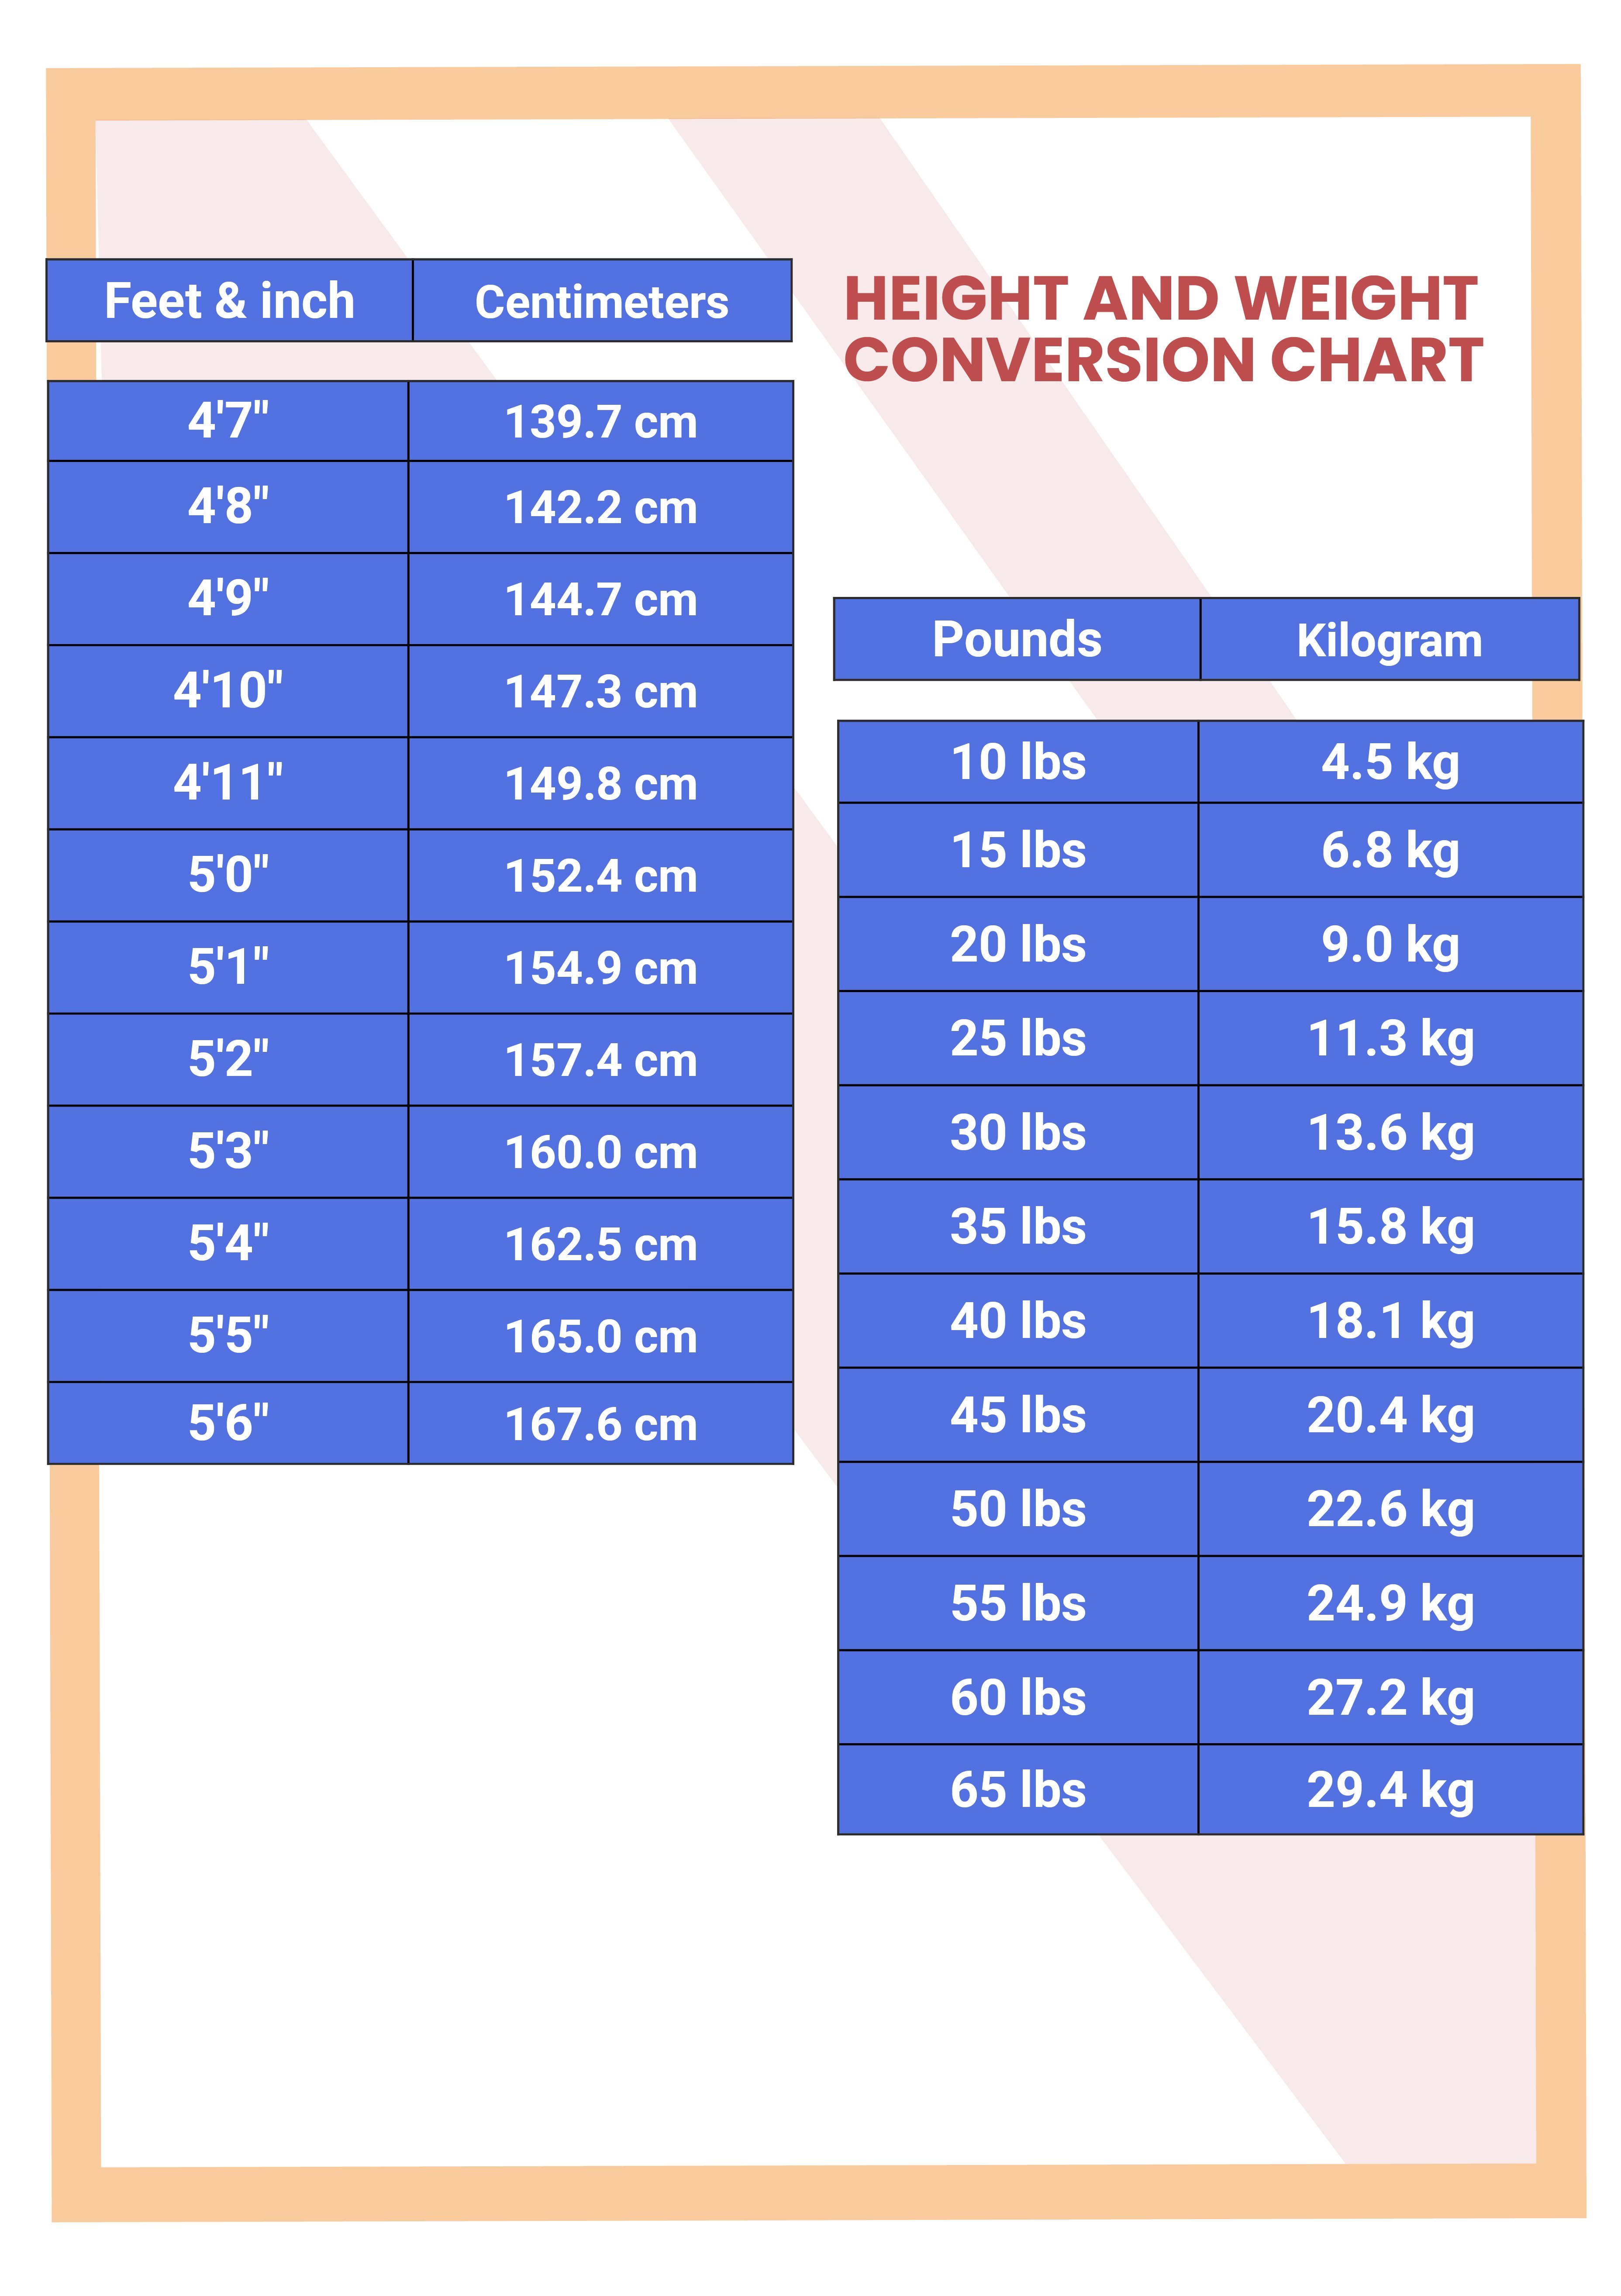 free-height-conversion-chart-download-in-pdf-template